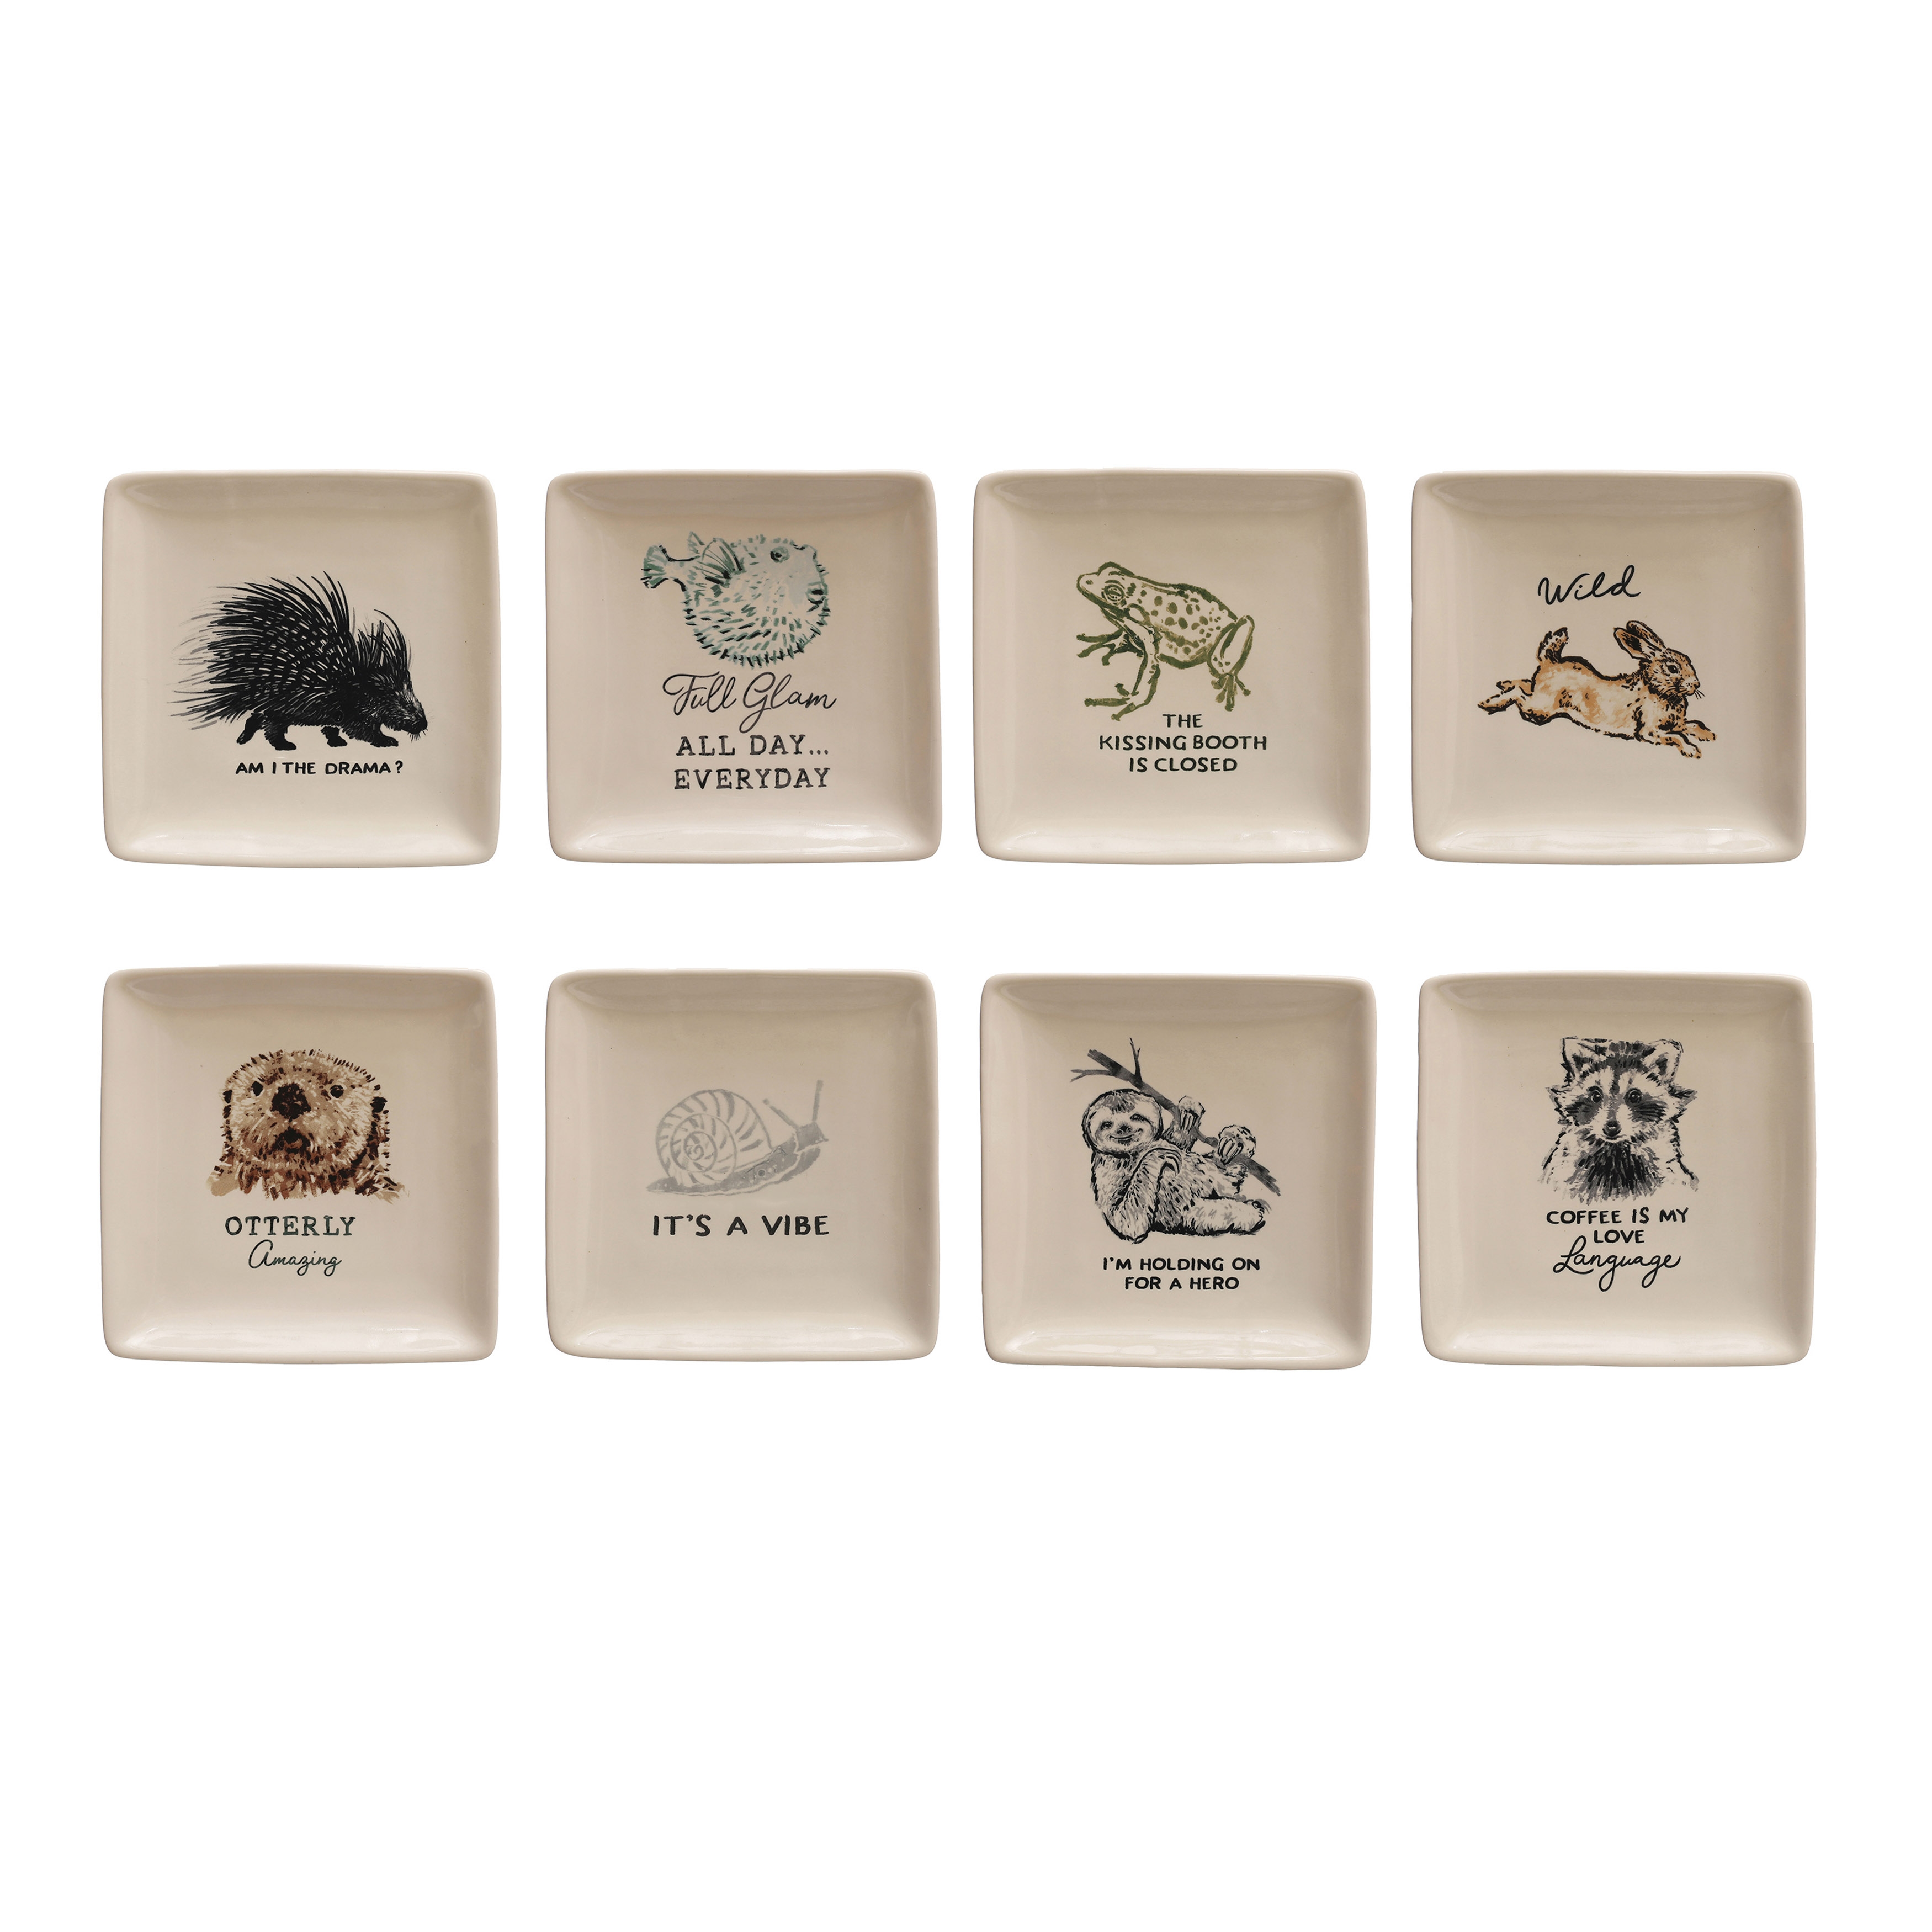 5 Inches Square Stoneware Dish with Animal and Text Prints, Cream, Set of 8 - Image 0